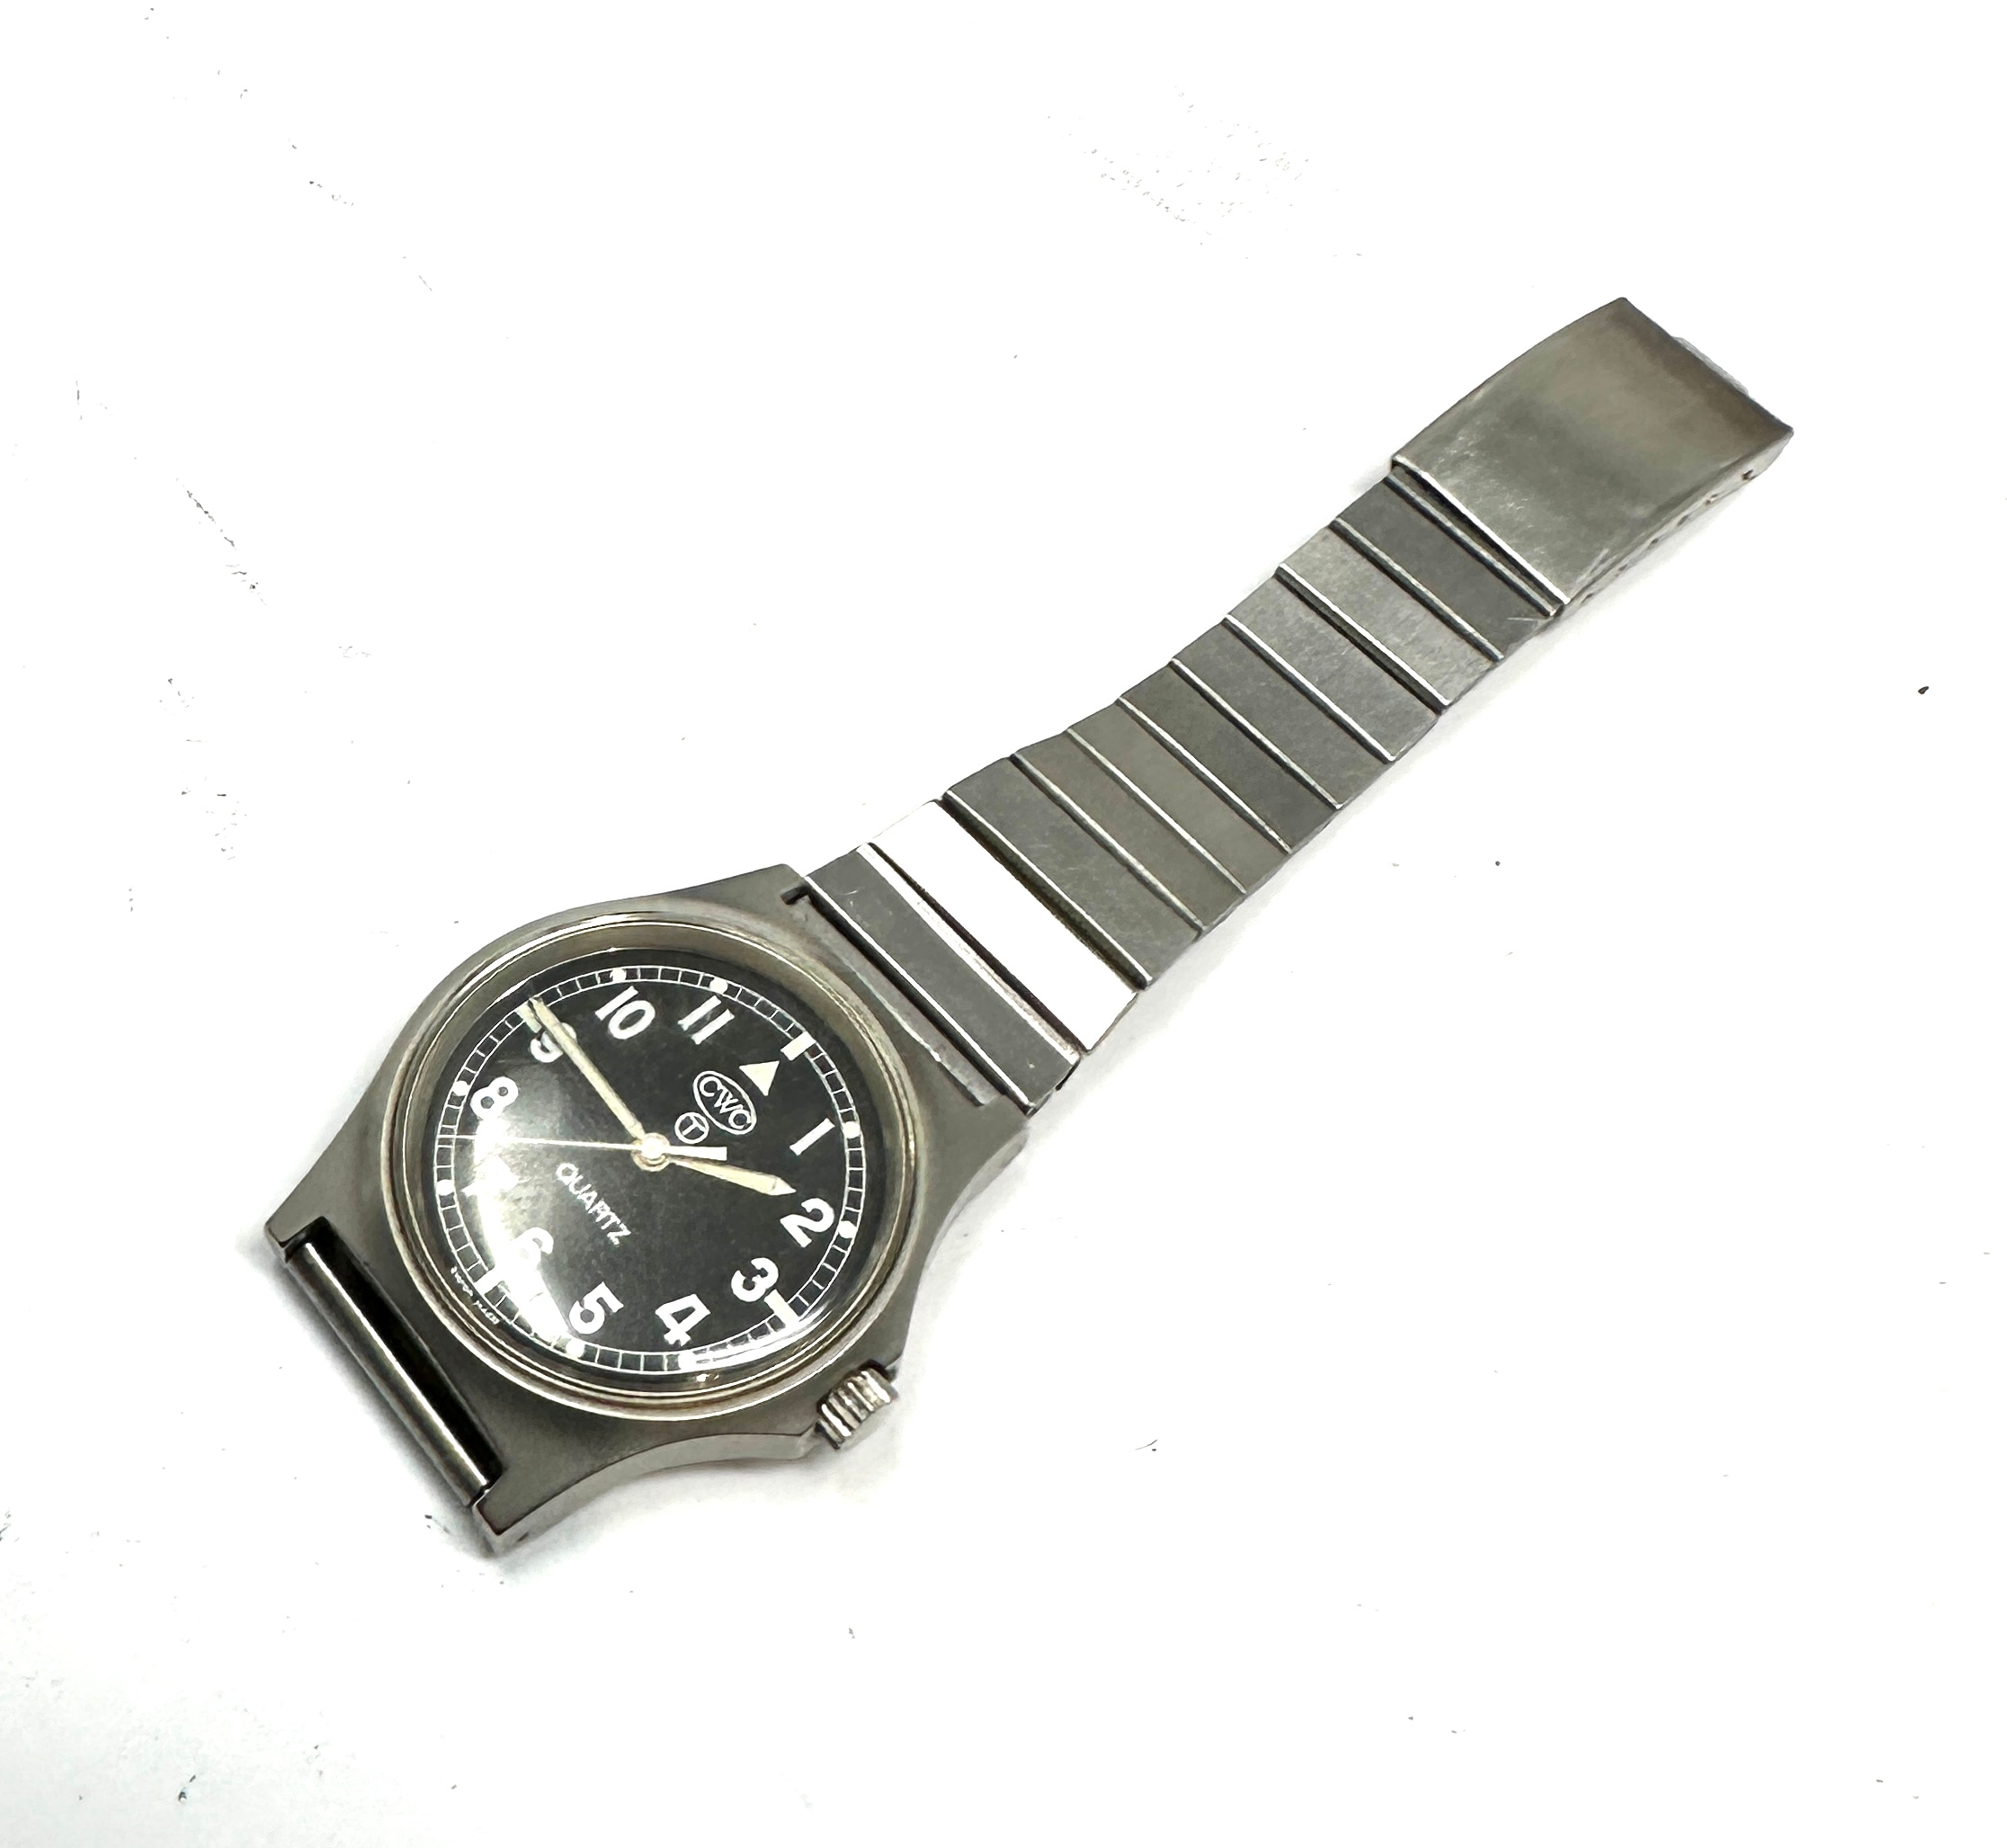 CWC G10 military Quartz watch 0552 Royal Navy/Royal Marine Issue In Working Order - Image 5 of 5